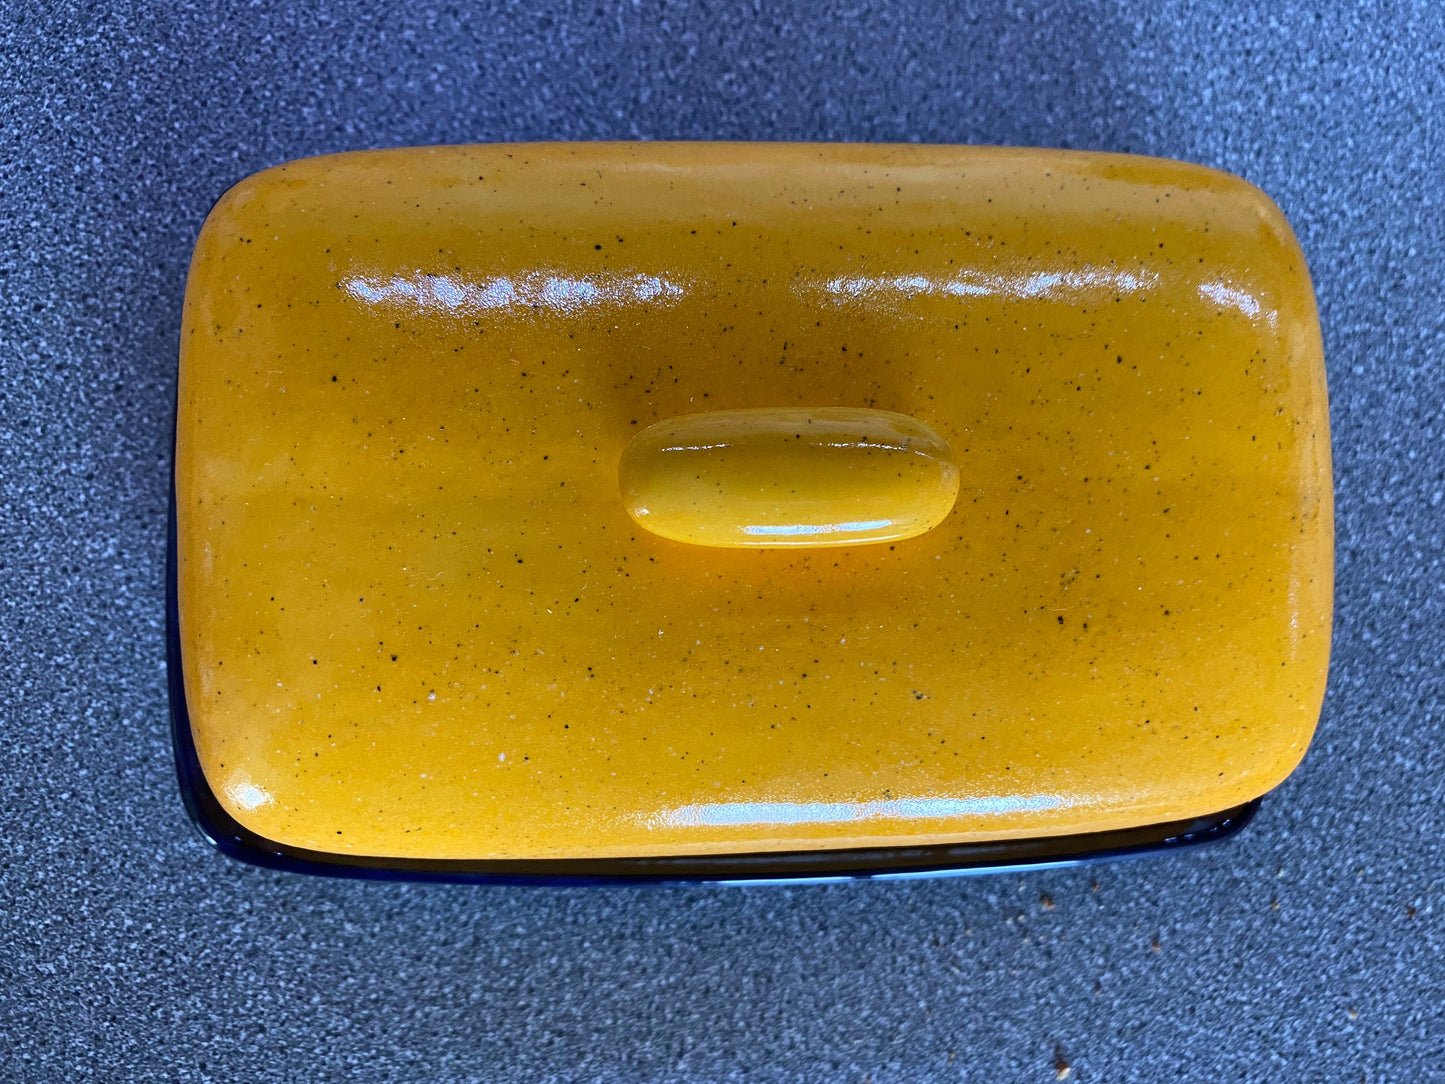 Ceramic Butter Dish with Yellow Lid and Jet Black Glossy Dish - PeterBowenArt